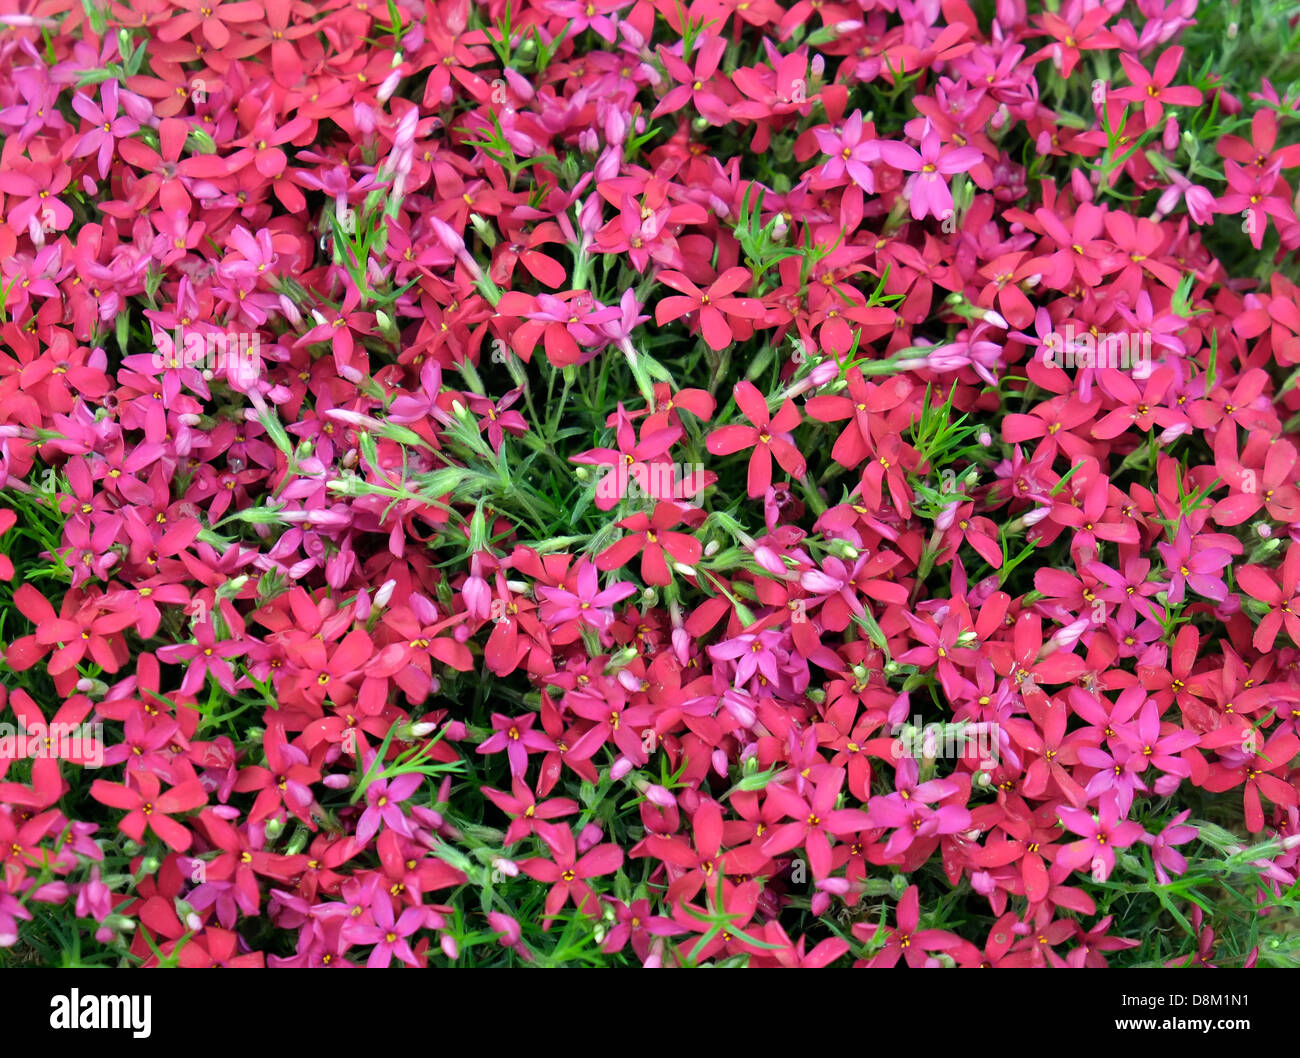 Phlox douglasii 'Zeigeunerblut' on display at the Chelsea Flower Show. Stock Photo